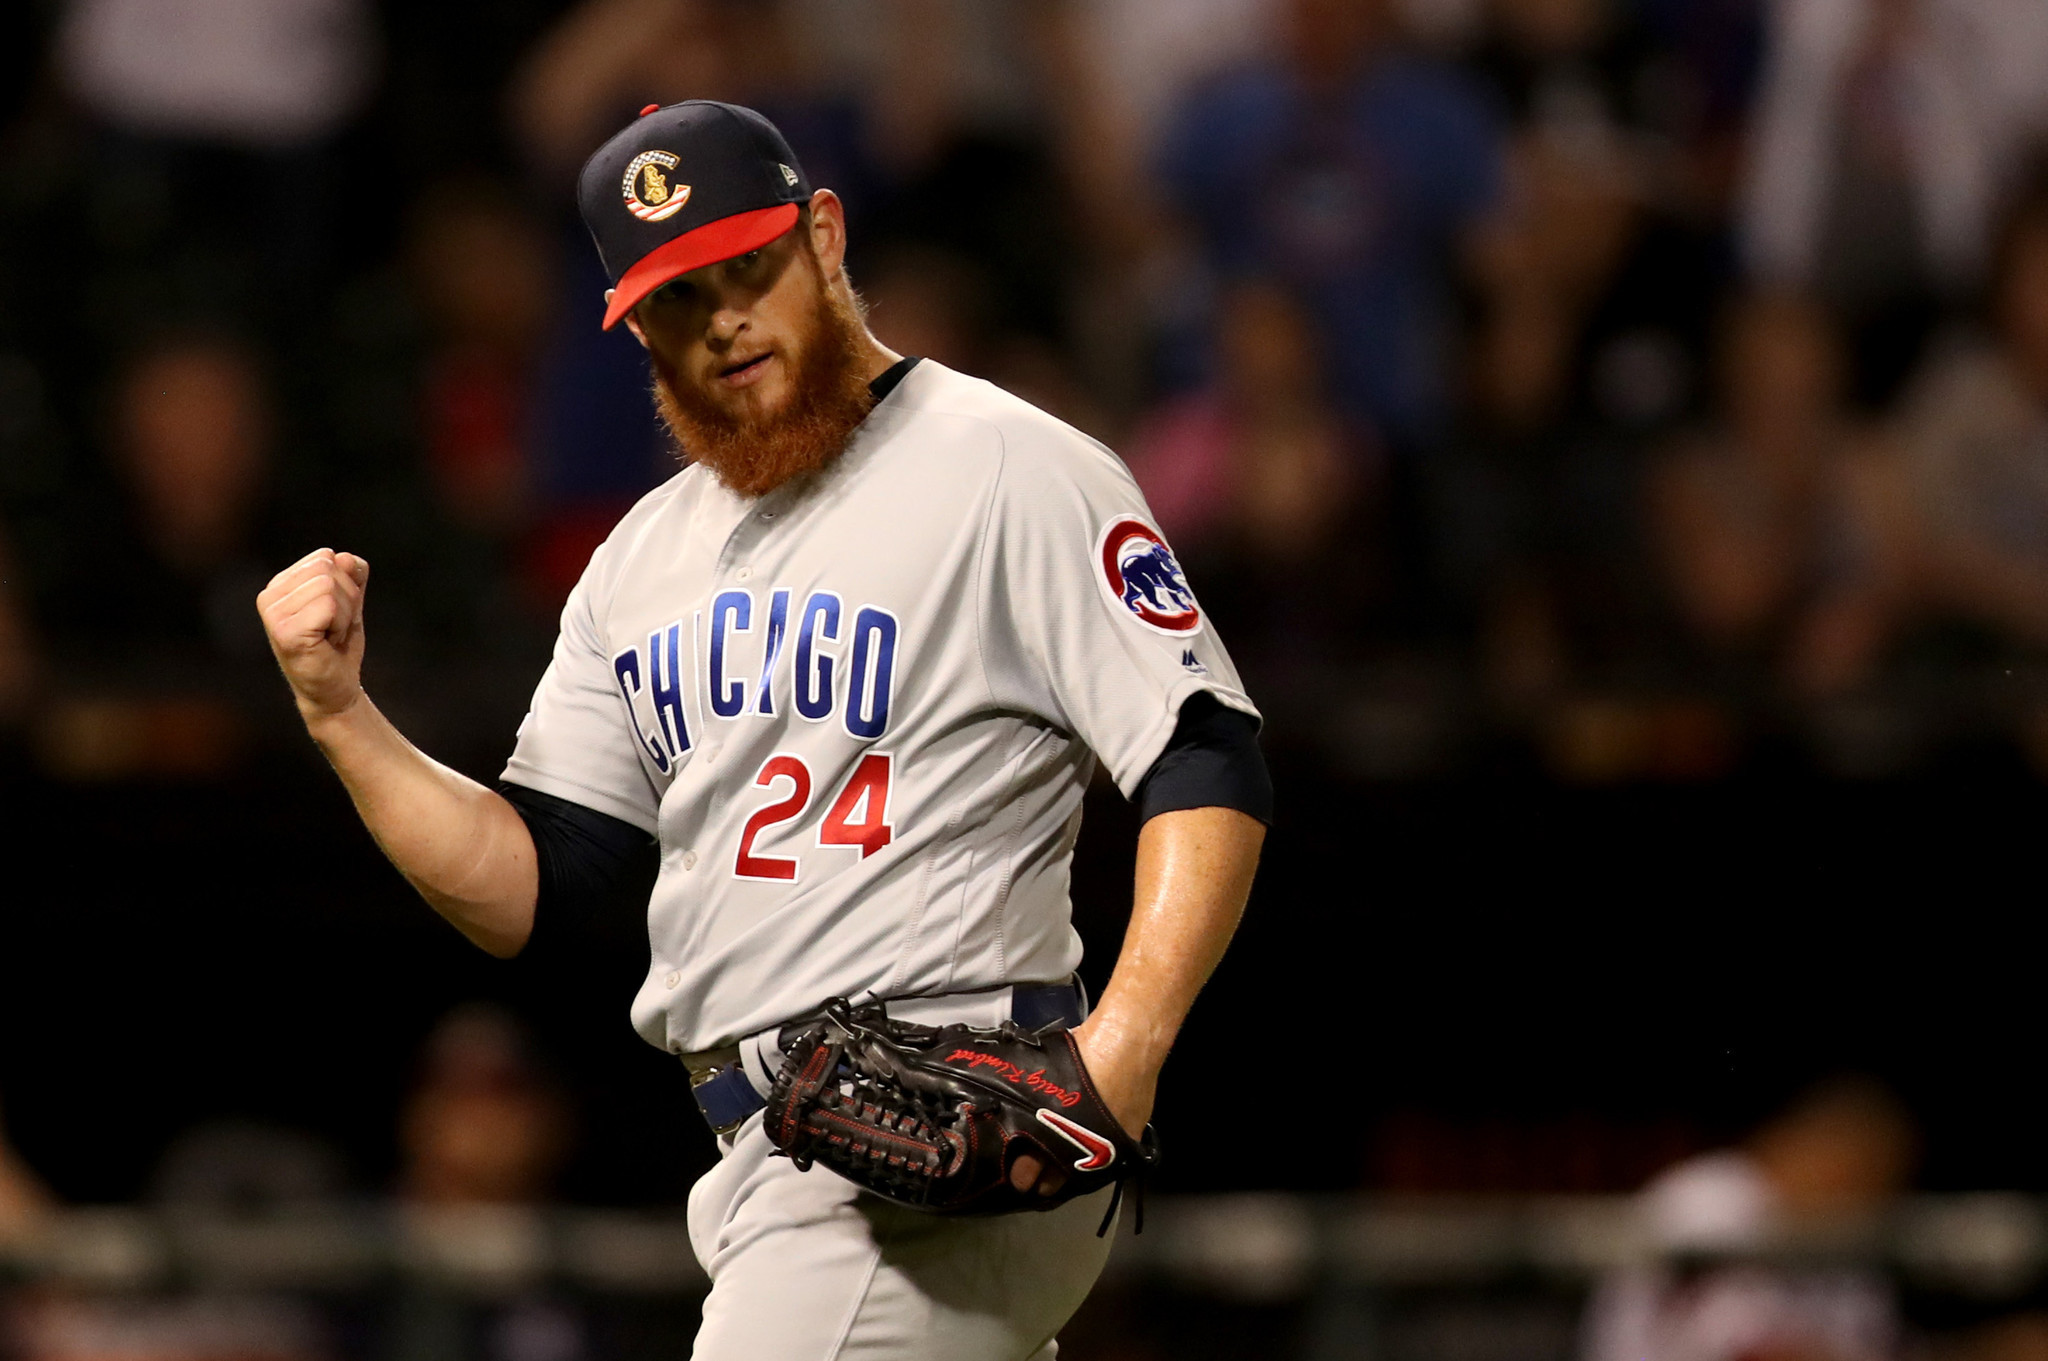 Craig Kimbrel's pitching stance is still getting mocked — this time by  Little Leaguers